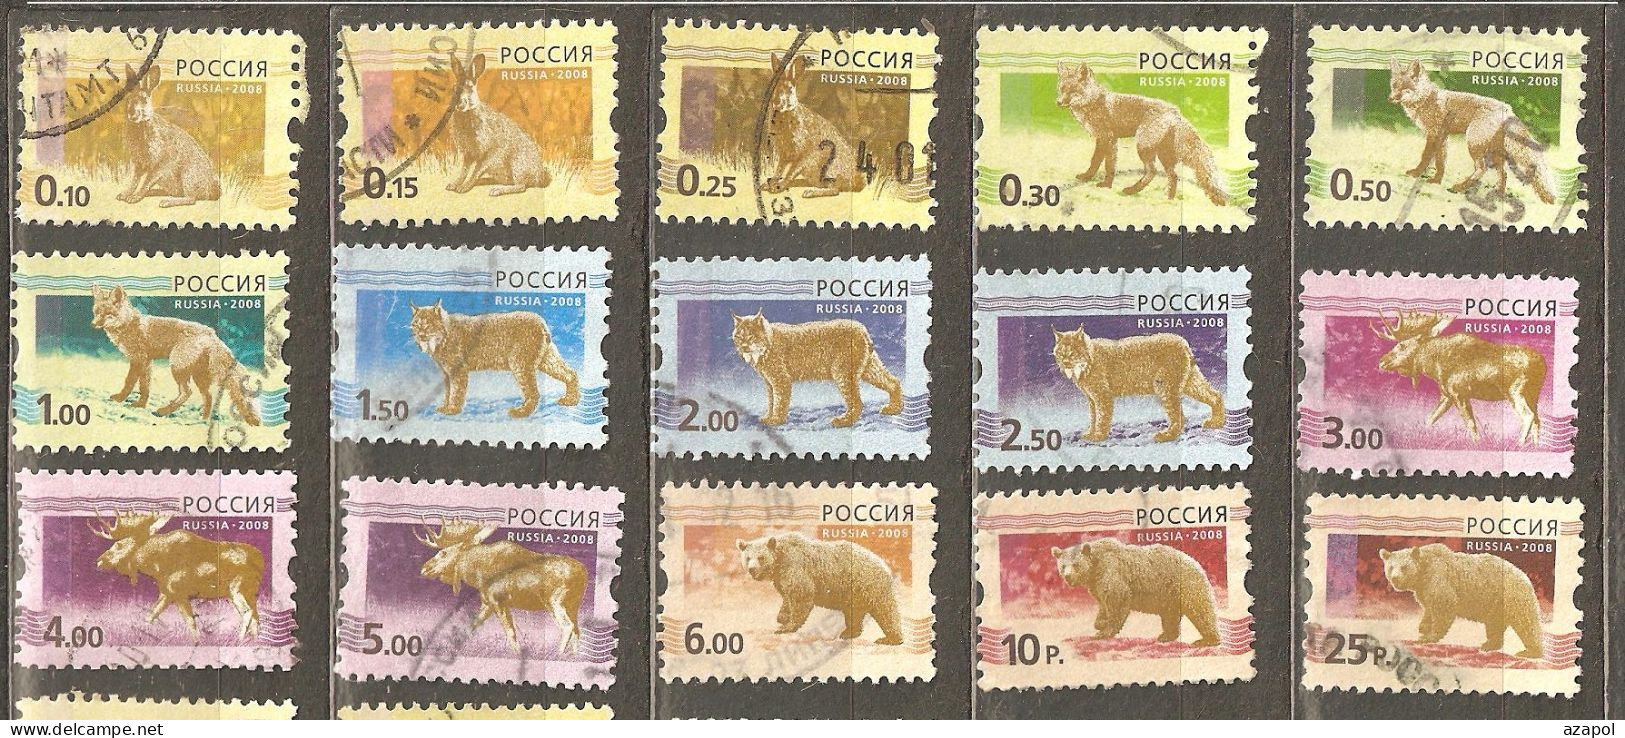 Russia: Full Set Of 15 Used Definitive Stamps, Wild Animals, 2008, Mi#1482-96 - Used Stamps